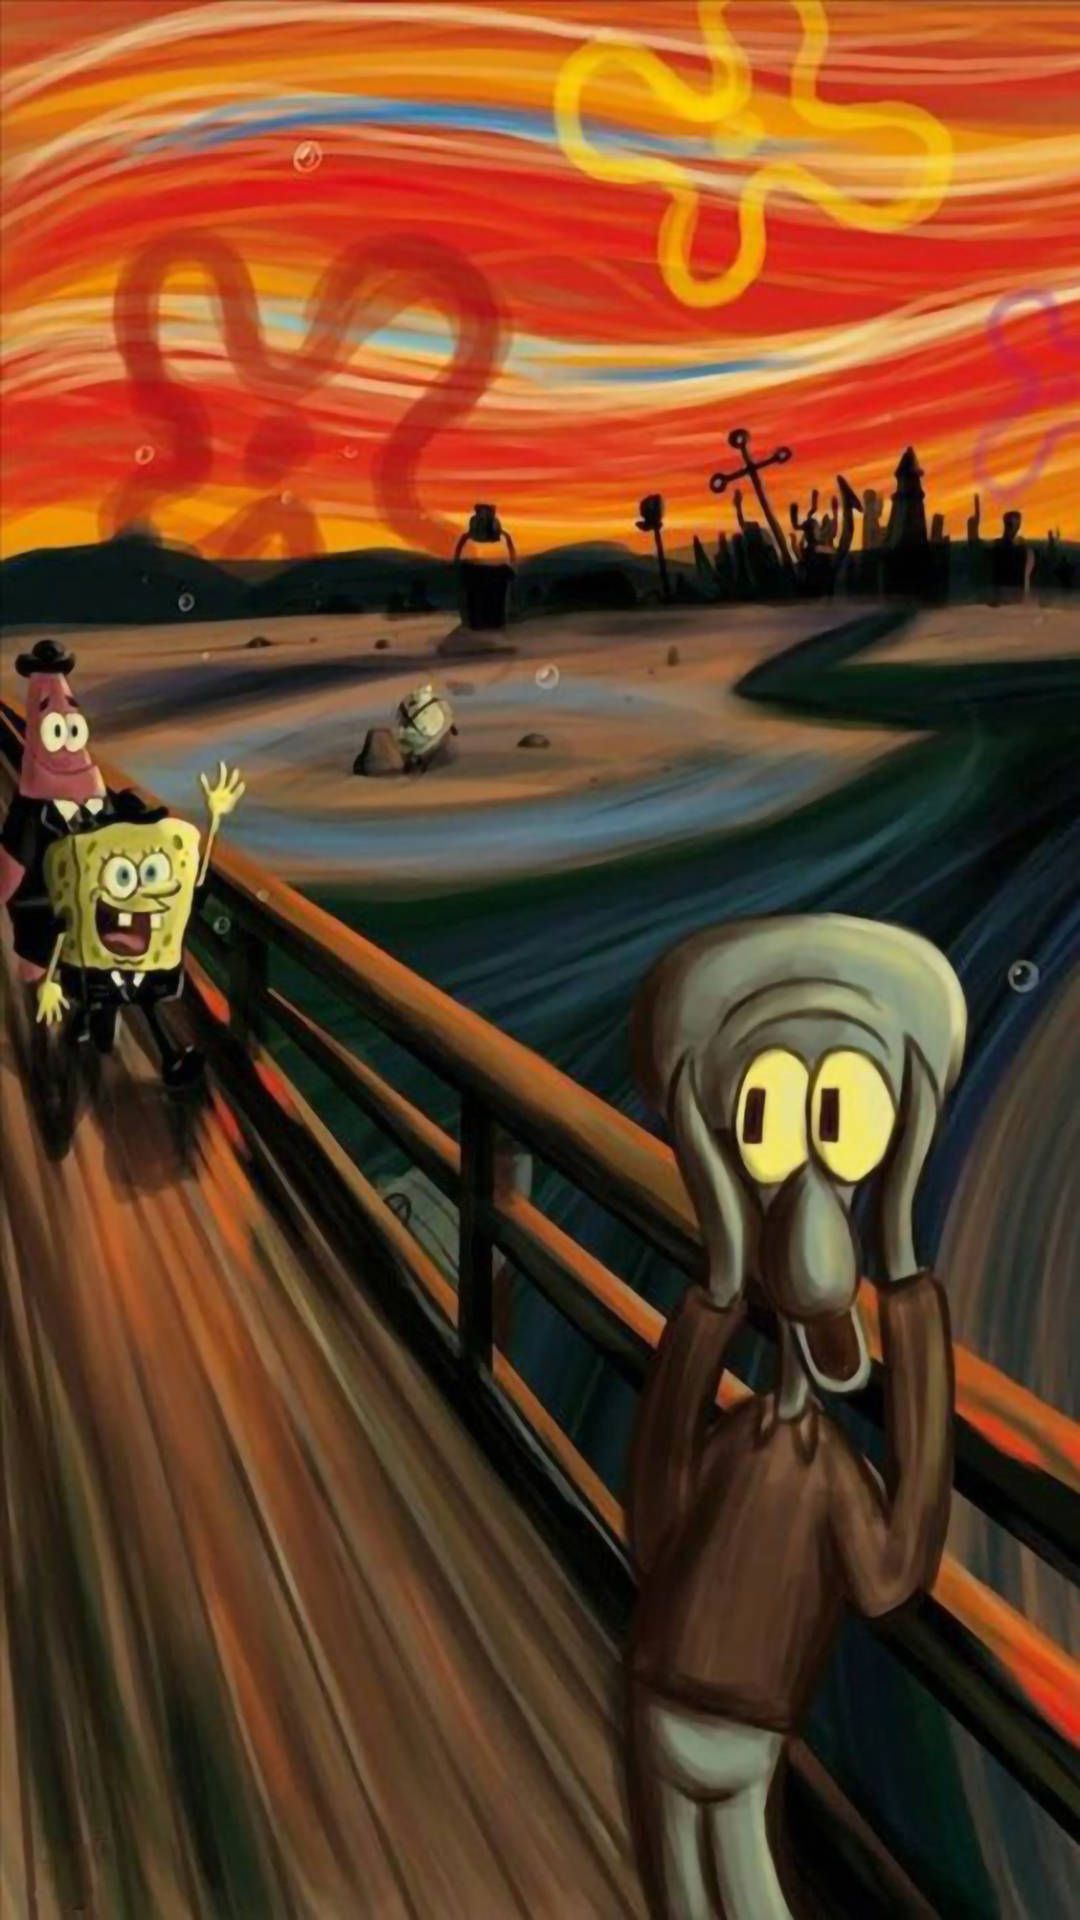 The Scream with Spongebob characters - Squidward, The Scream